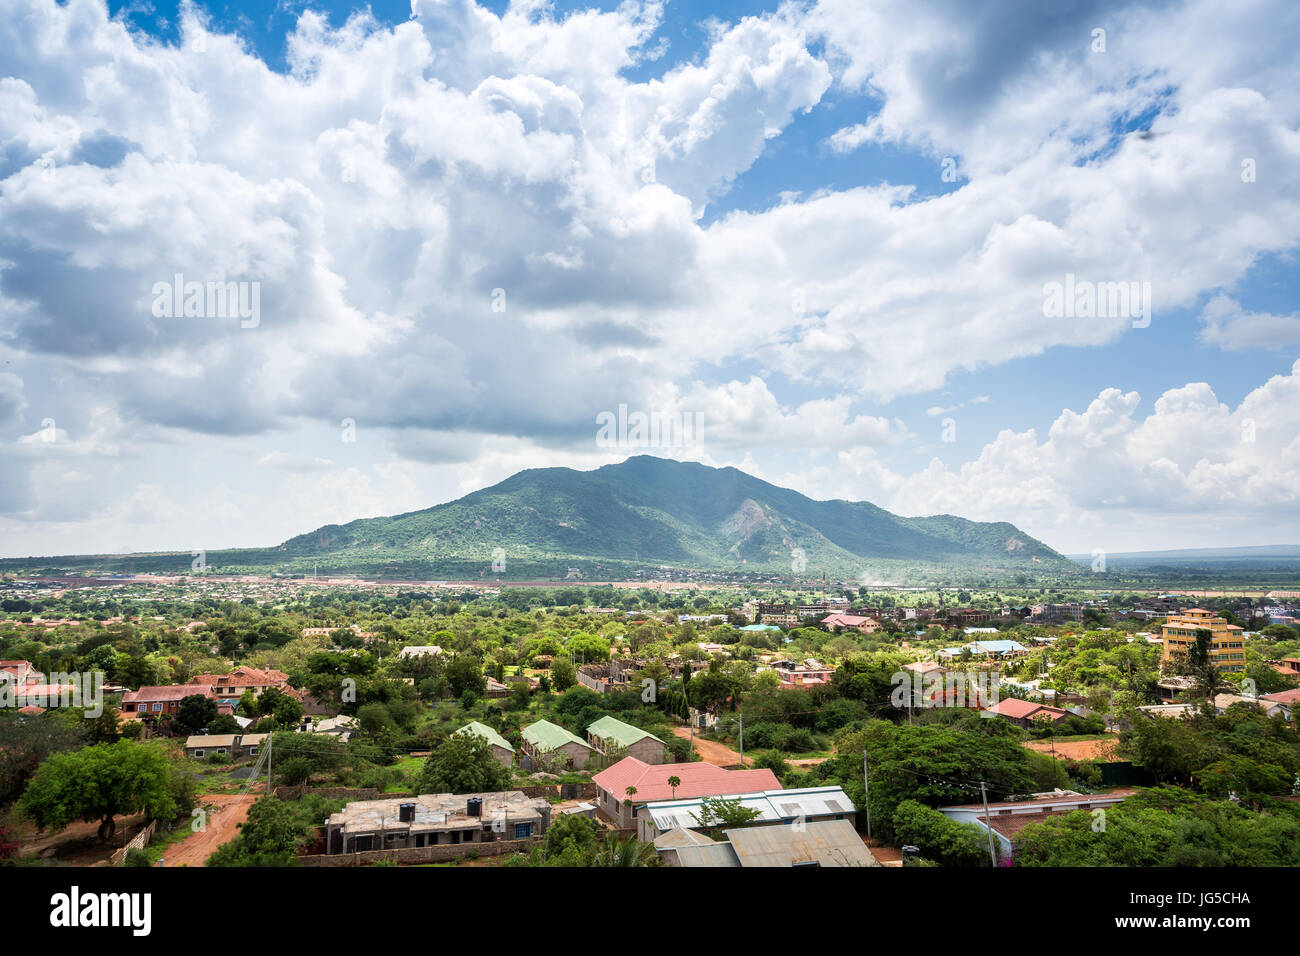 Town of Voi and surrounding nature, Kenya, East Africa Stock Photo - Alamy